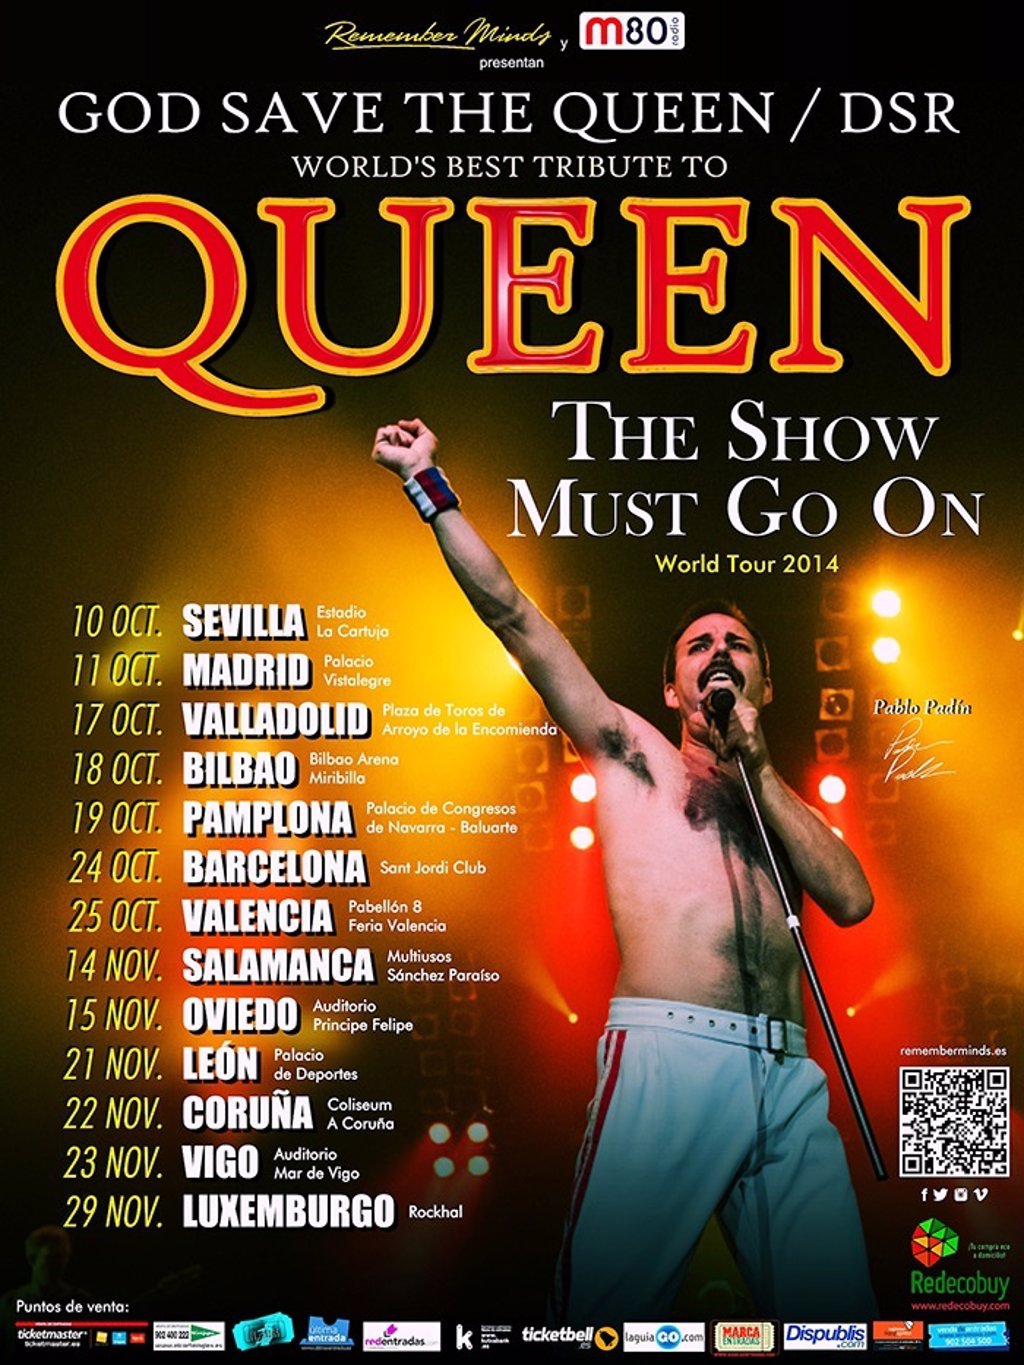 god save the queen tour